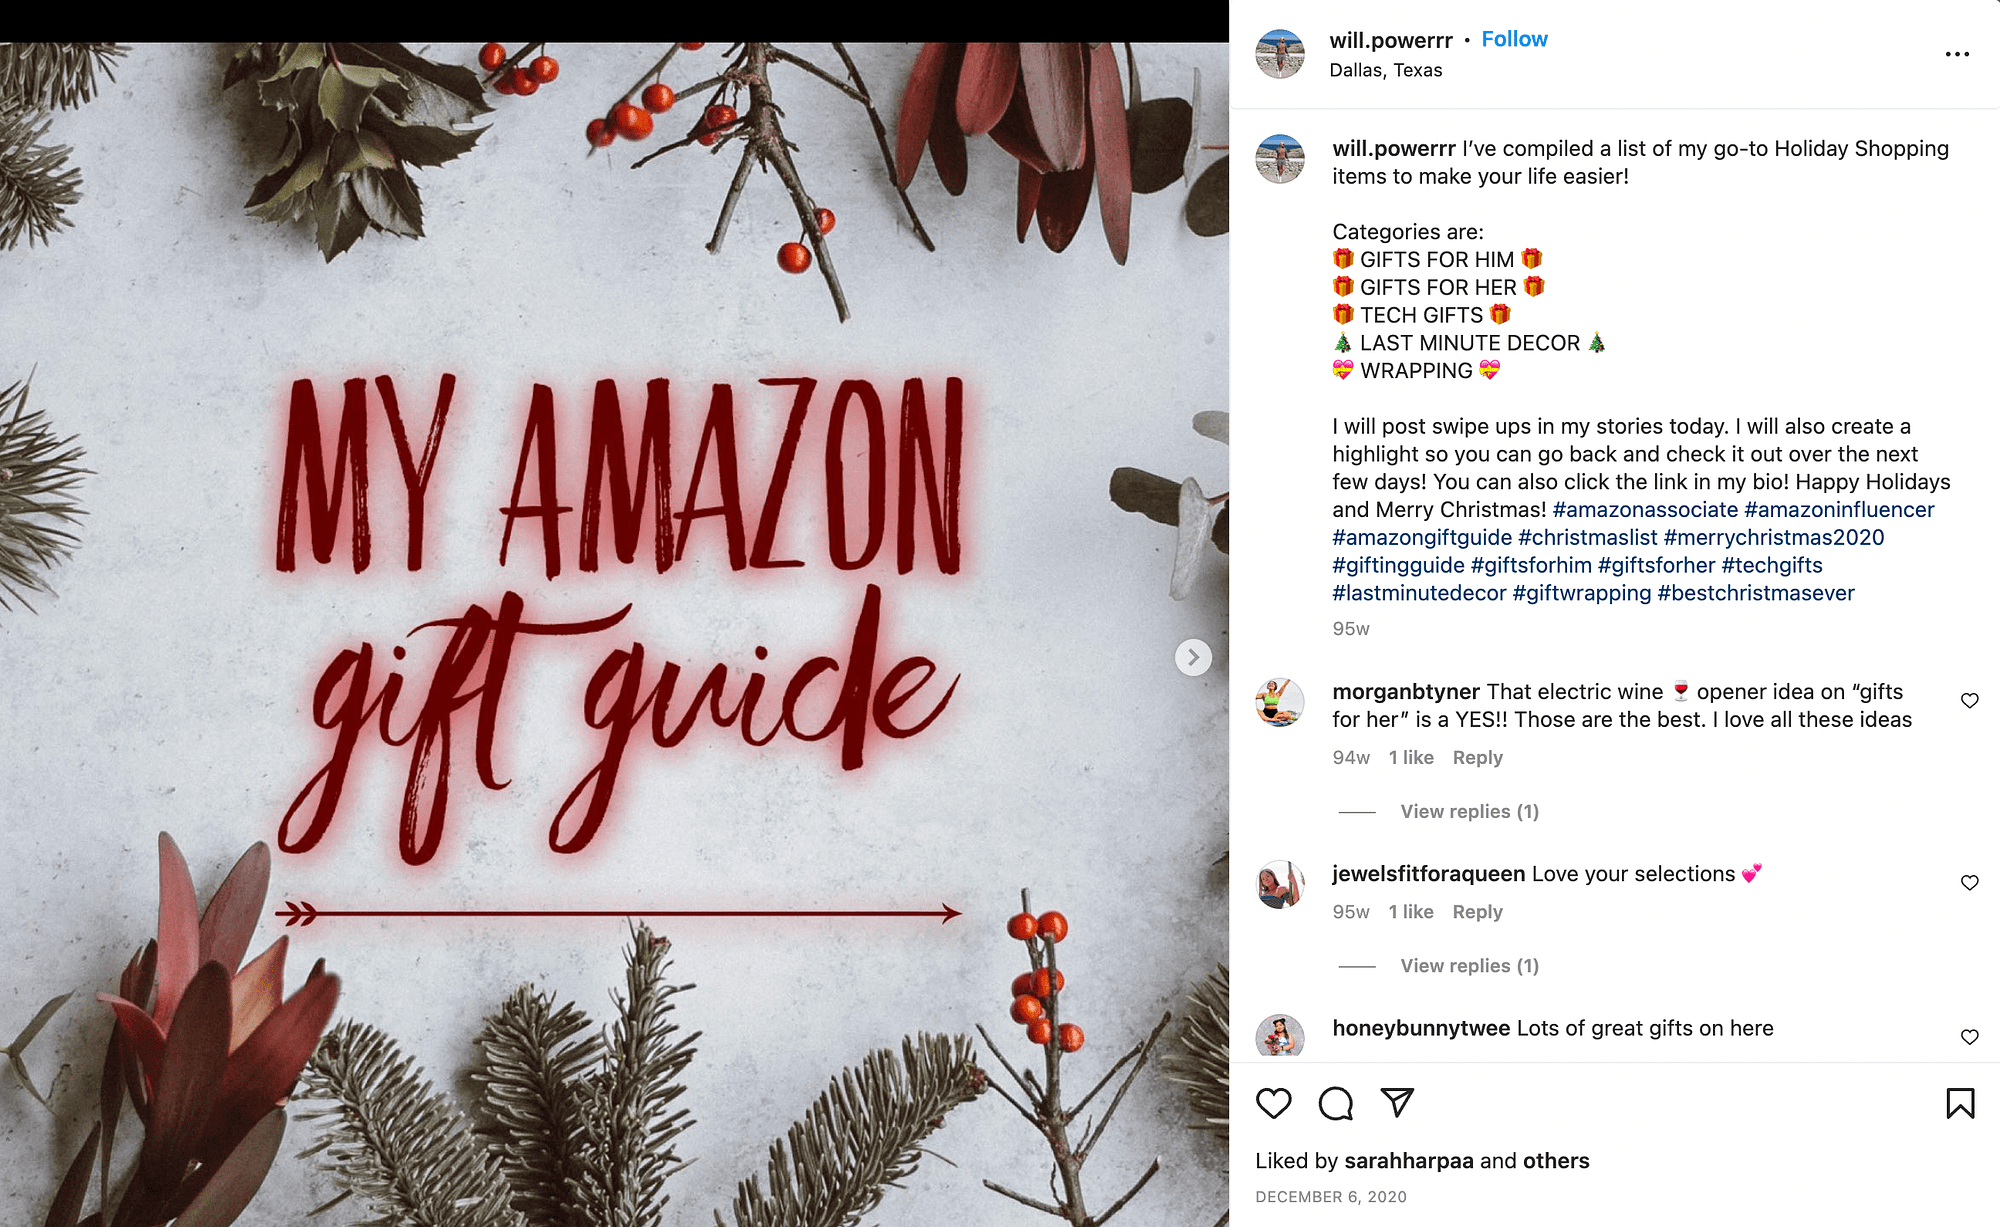 Promoting an Amazon gift guide on Instagram.